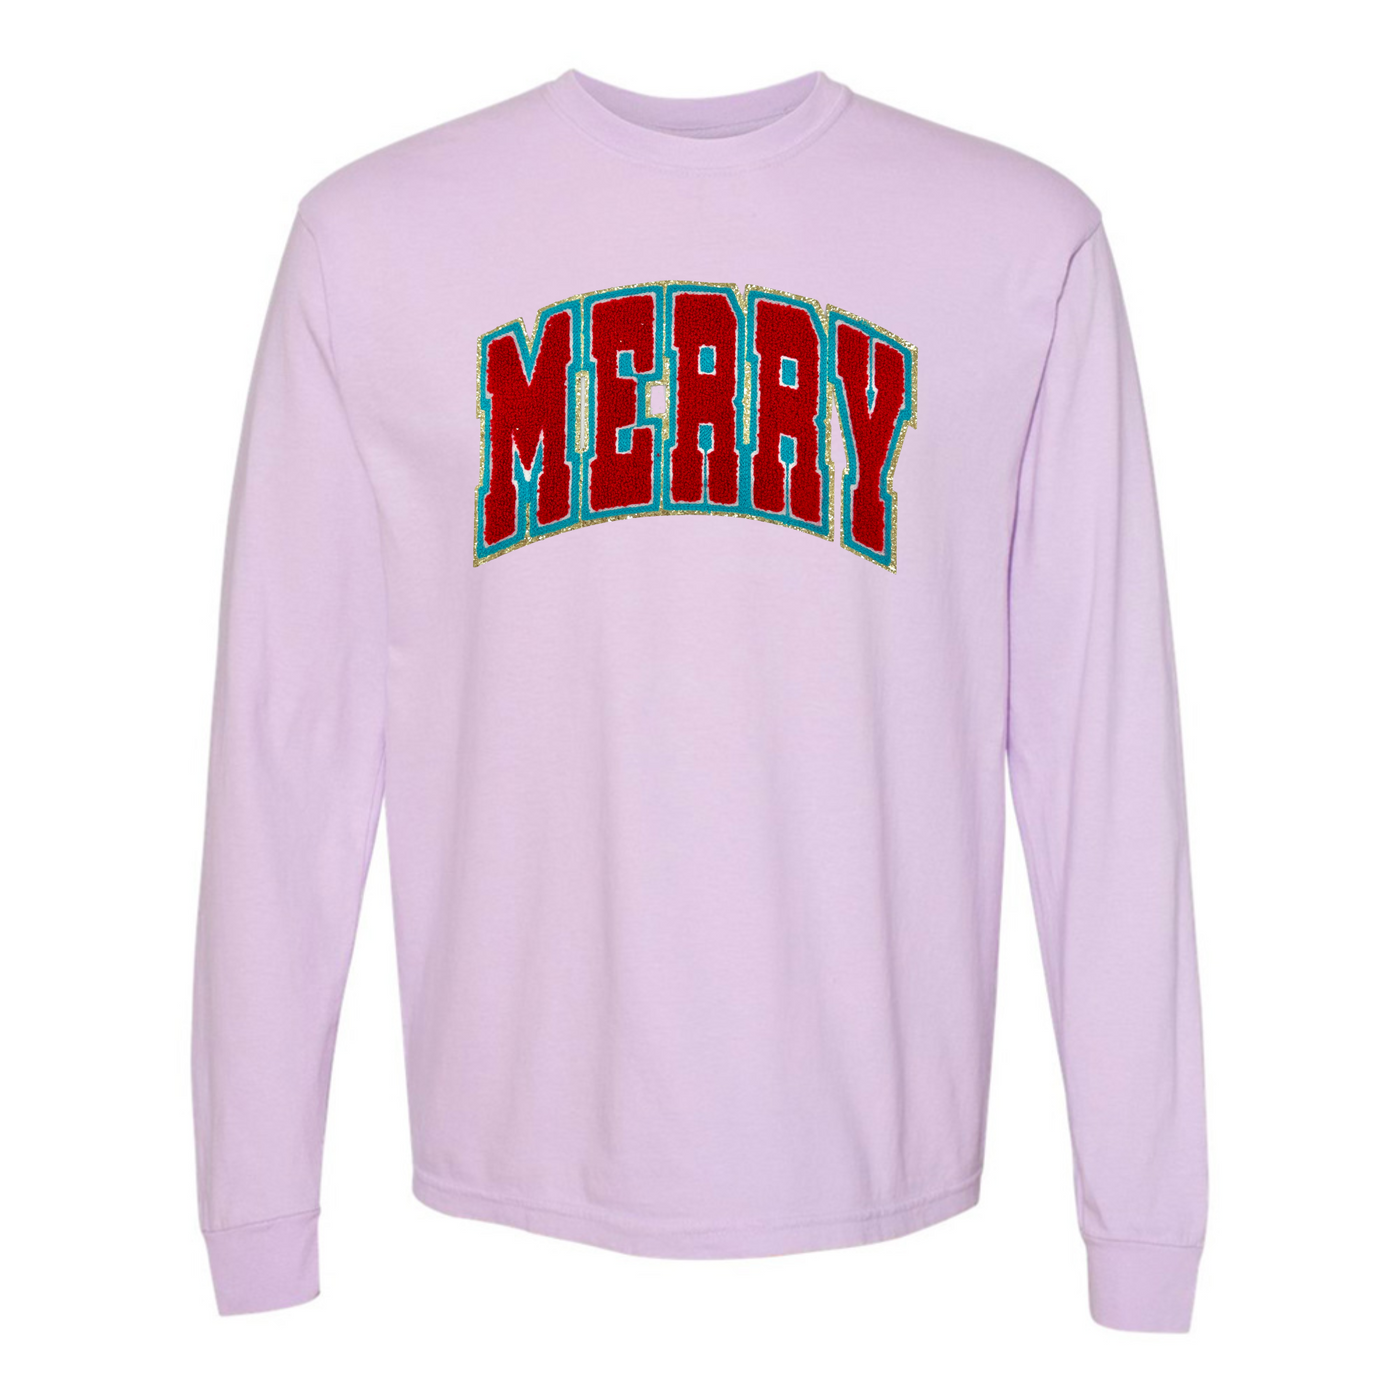 'Varsity Merry' Letter Patch Long Sleeve